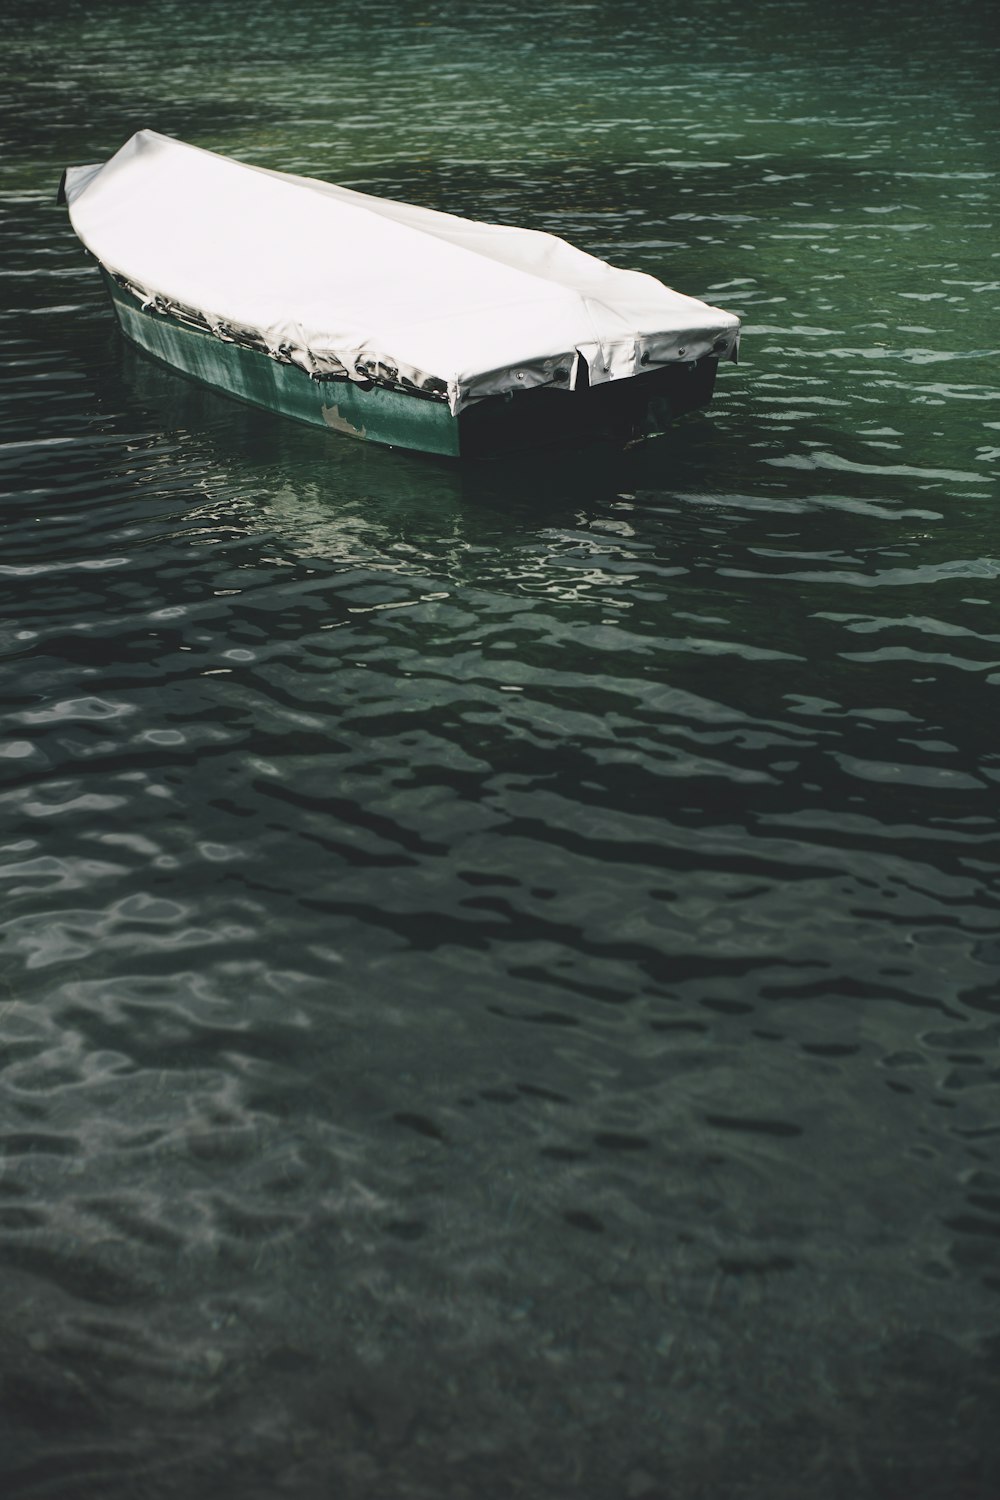 green boat on body of water during daytime